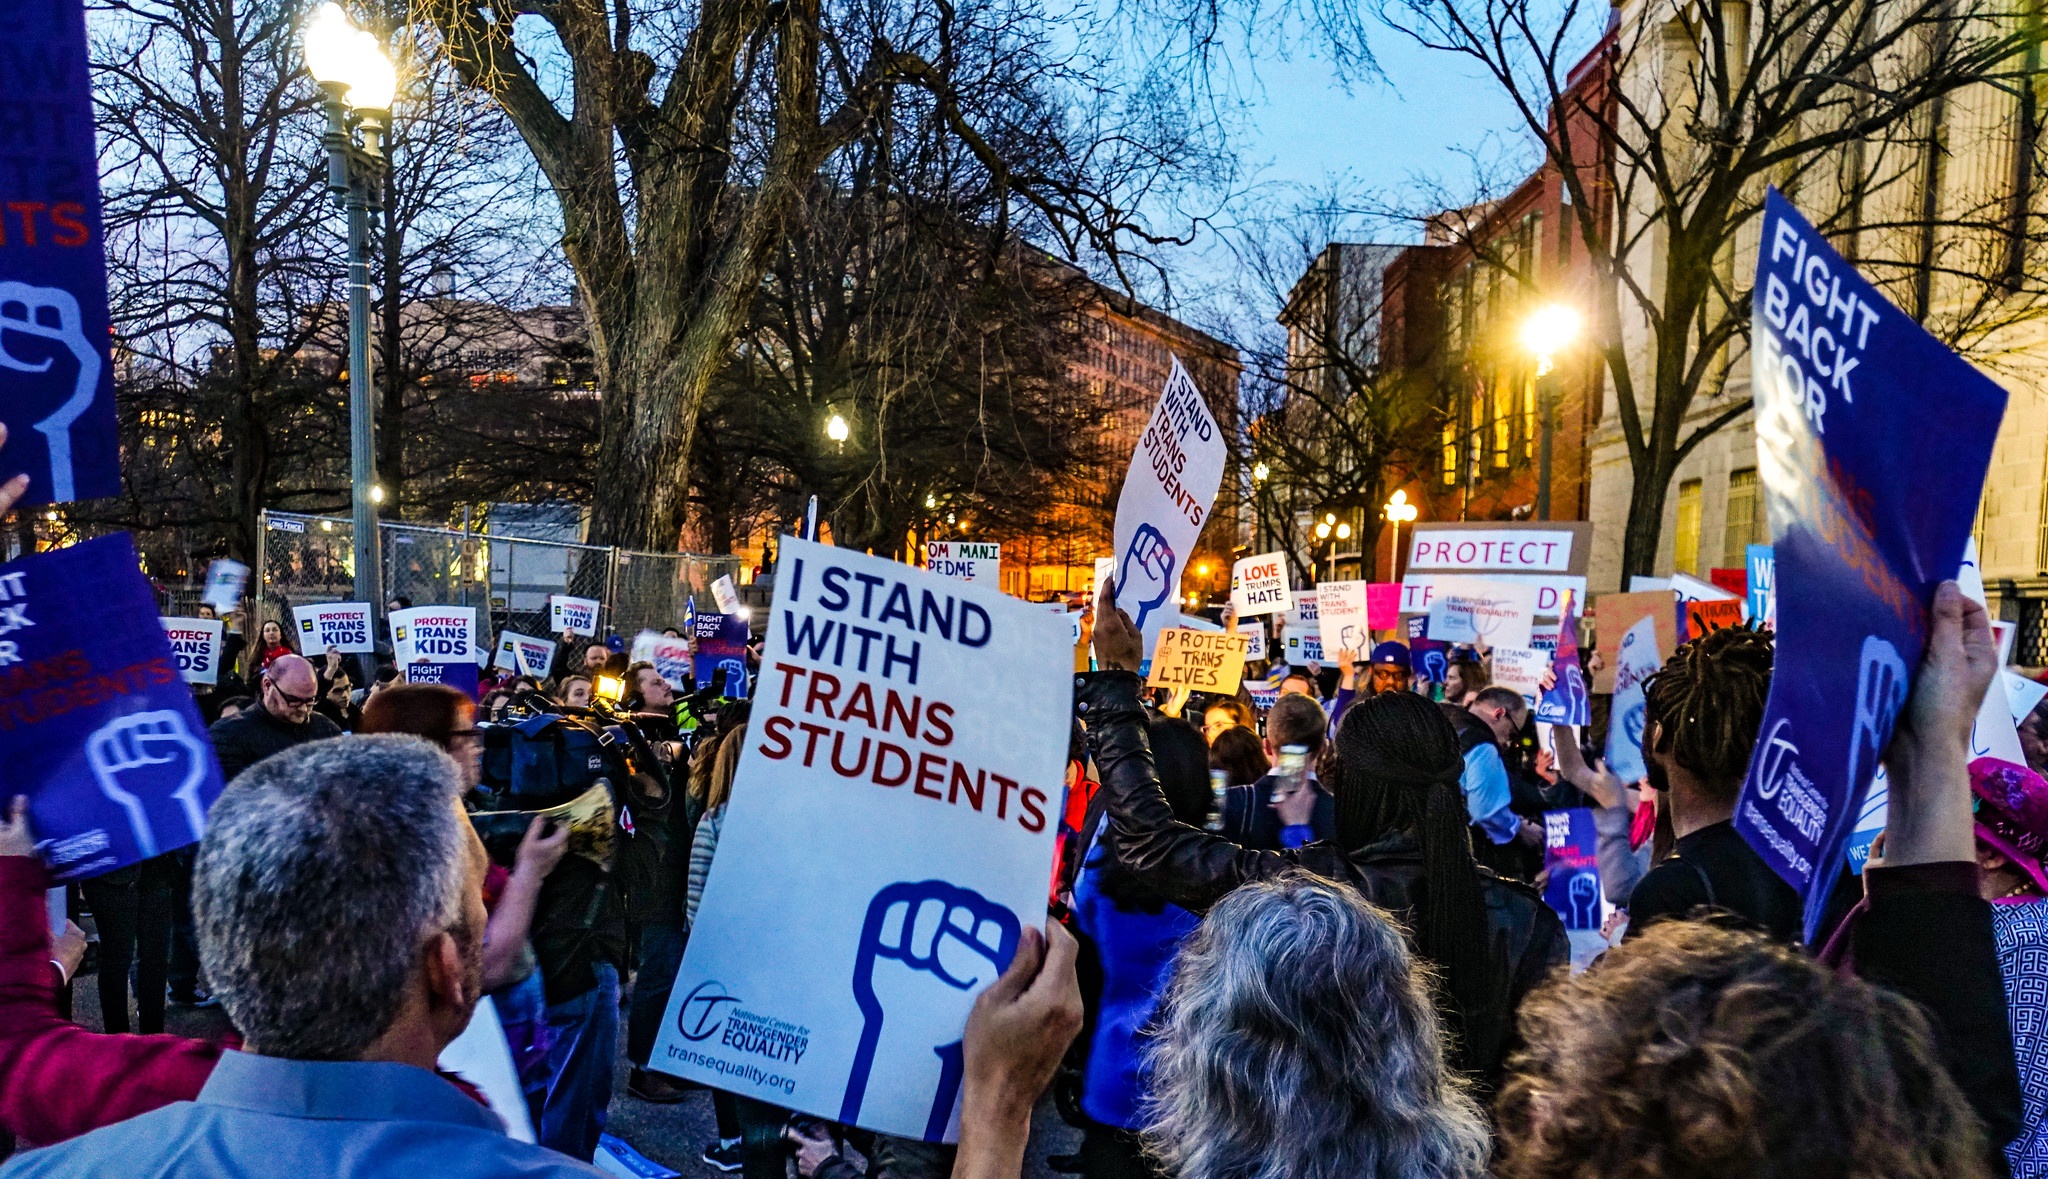 A crowd gathers in Washington, D.C. for a rally in support of trans students. The image depicts the backs of people's heads and a sign reading "I stand with trans student" can be seen.